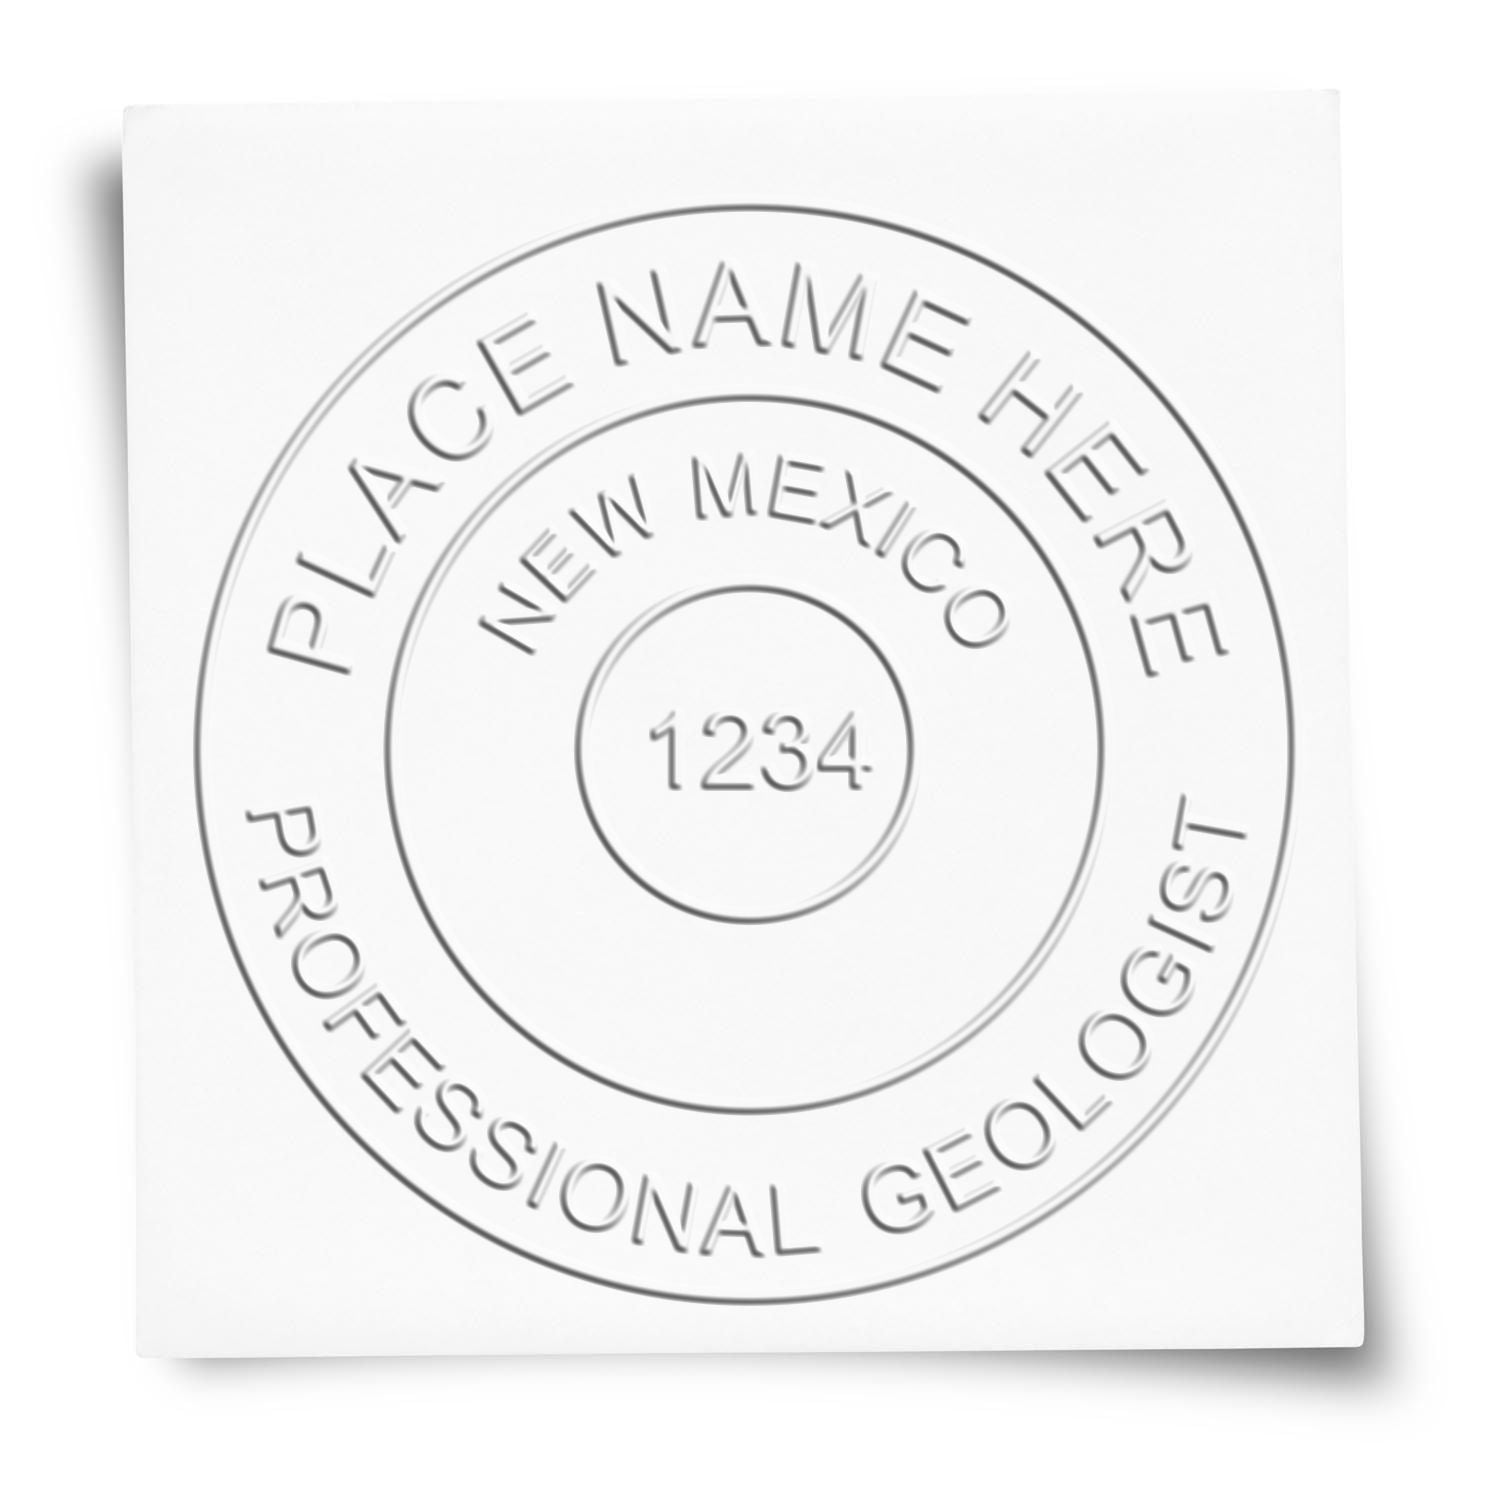 The main image for the State of New Mexico Extended Long Reach Geologist Seal depicting a sample of the imprint and imprint sample